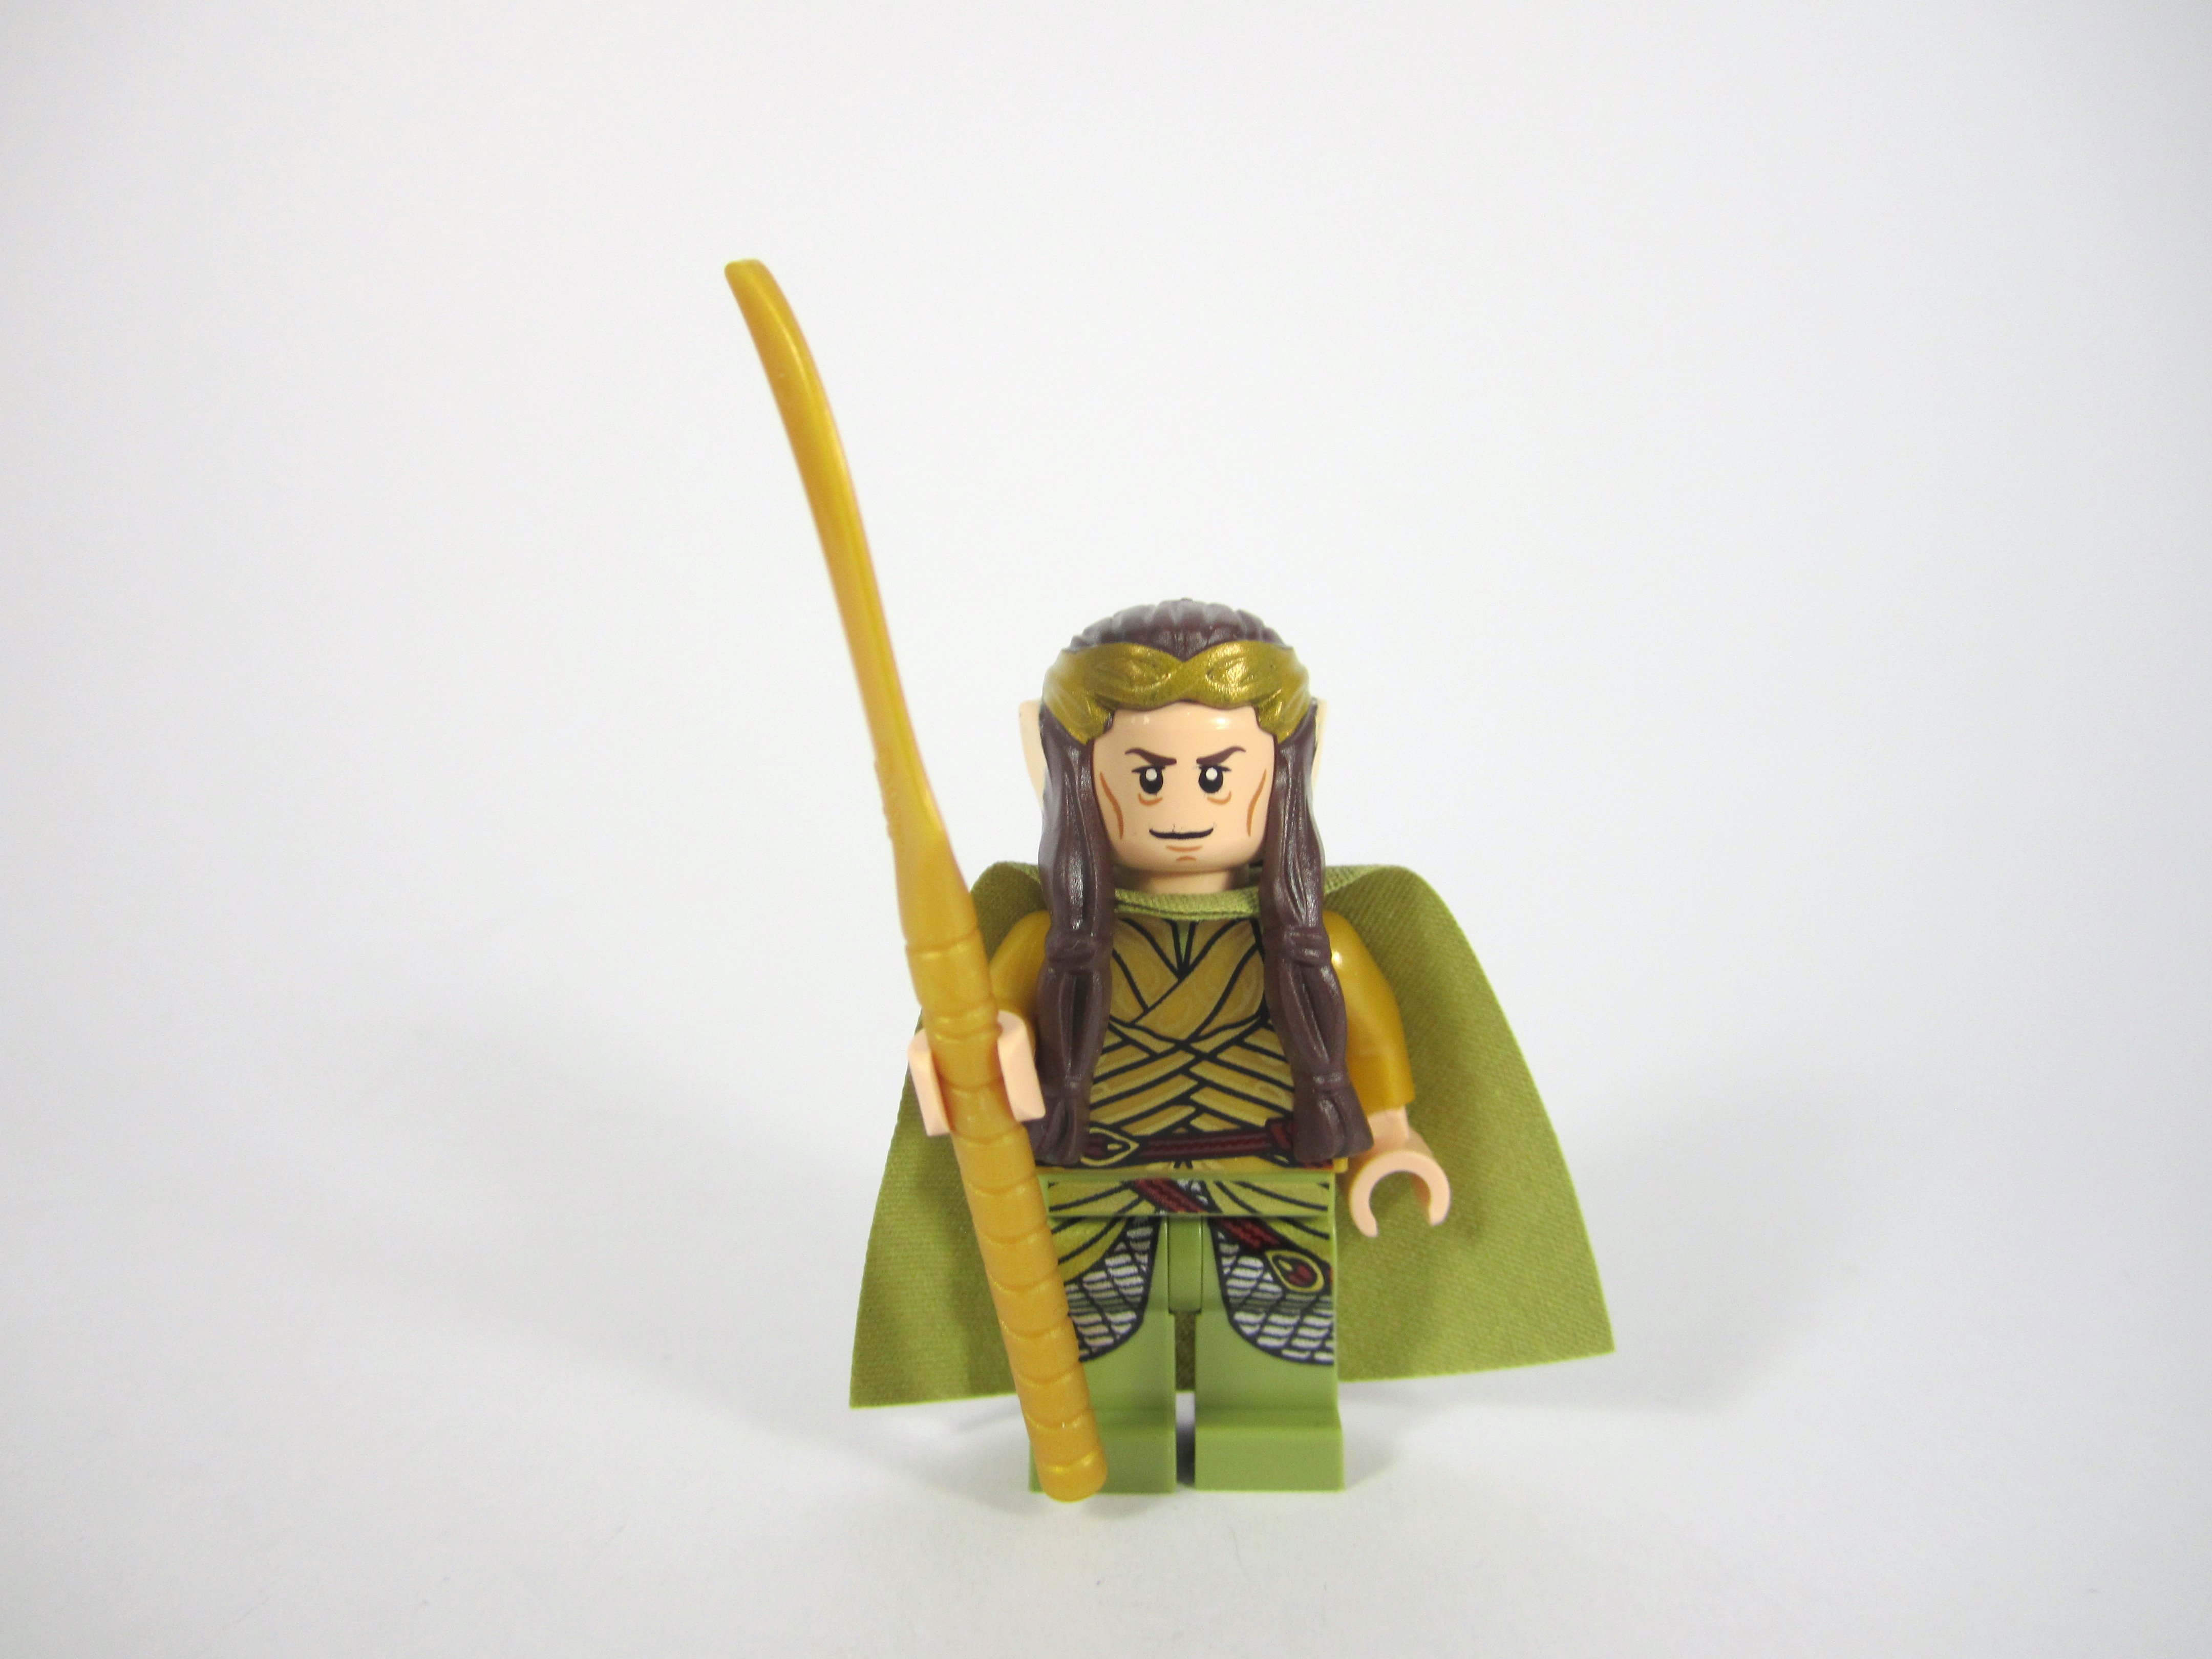 Lego Elrond 79015 Gold Crown Olive Green Clothing The Hobbit Minifigure 